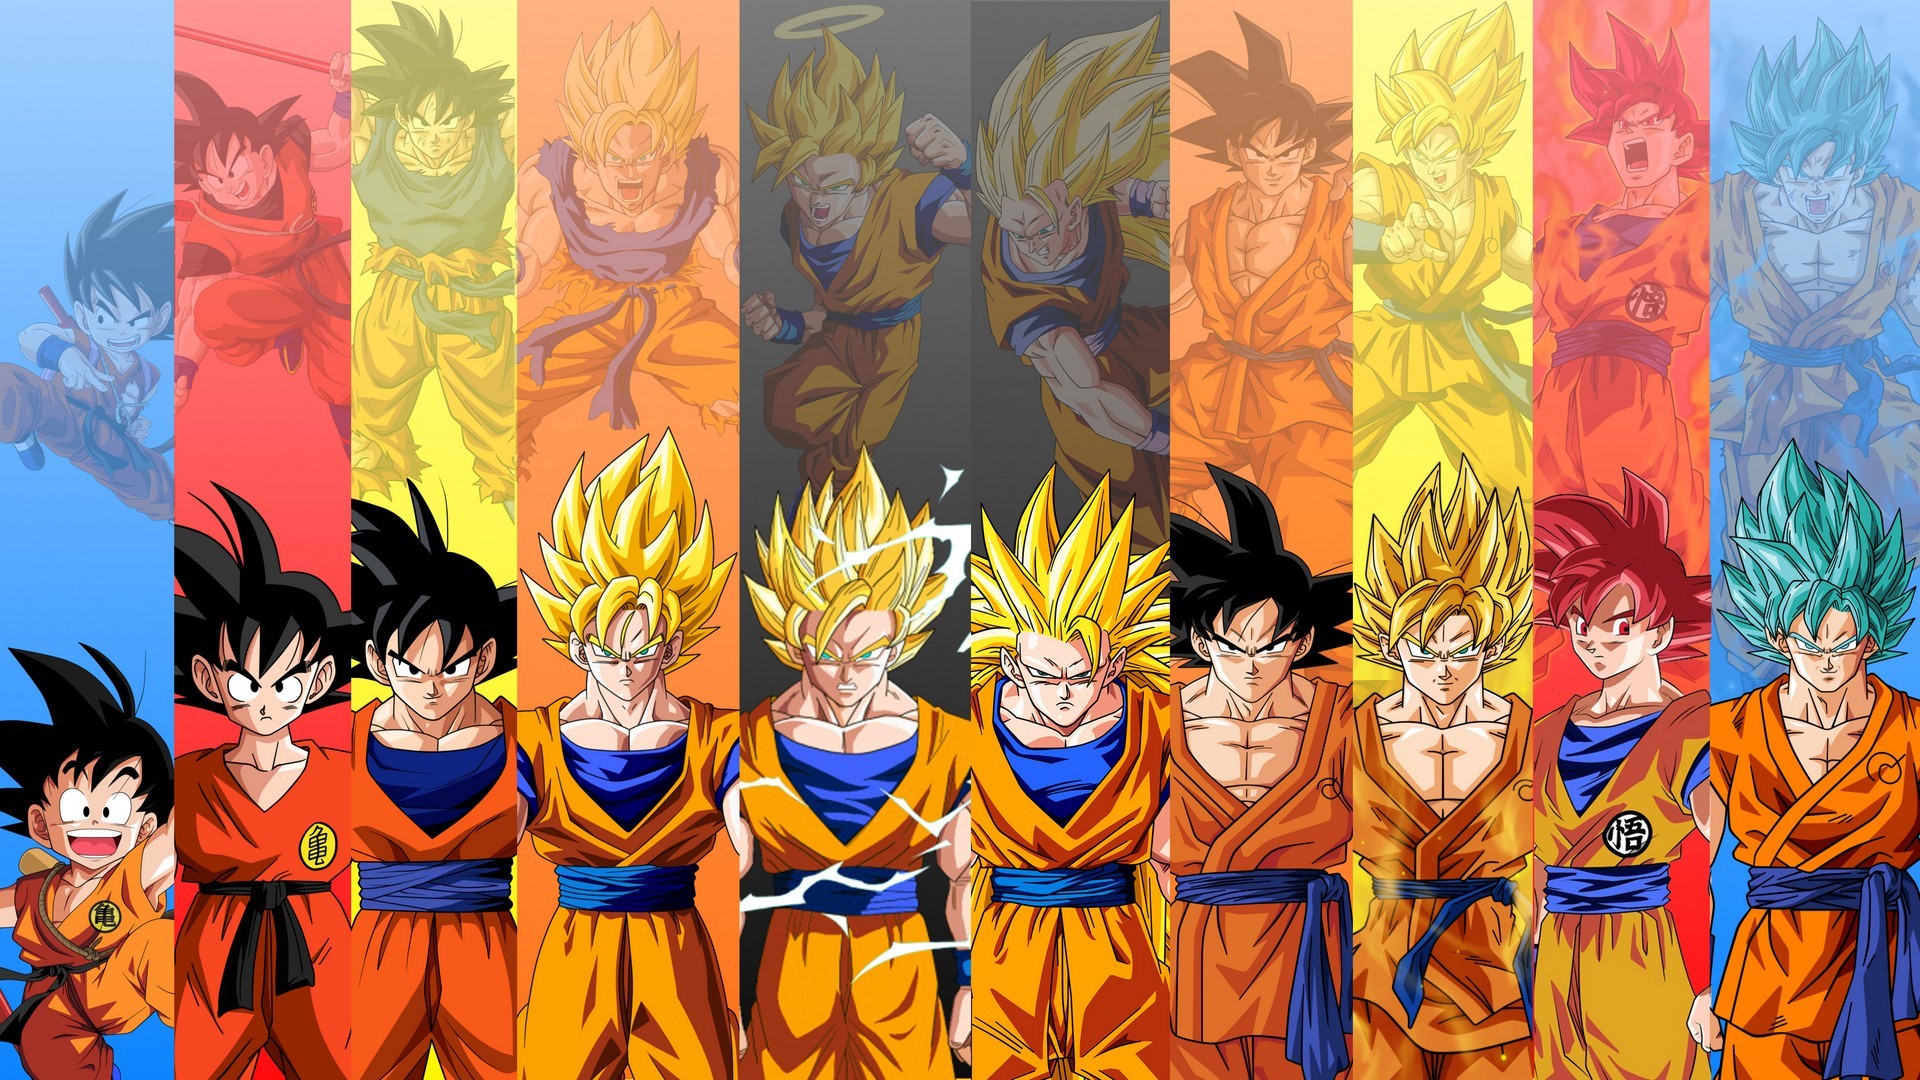 Wallpapers Goku with image resolution 1920x1080 pixel. You can use this wallpaper as background for your desktop Computer Screensavers, Android or iPhone smartphones